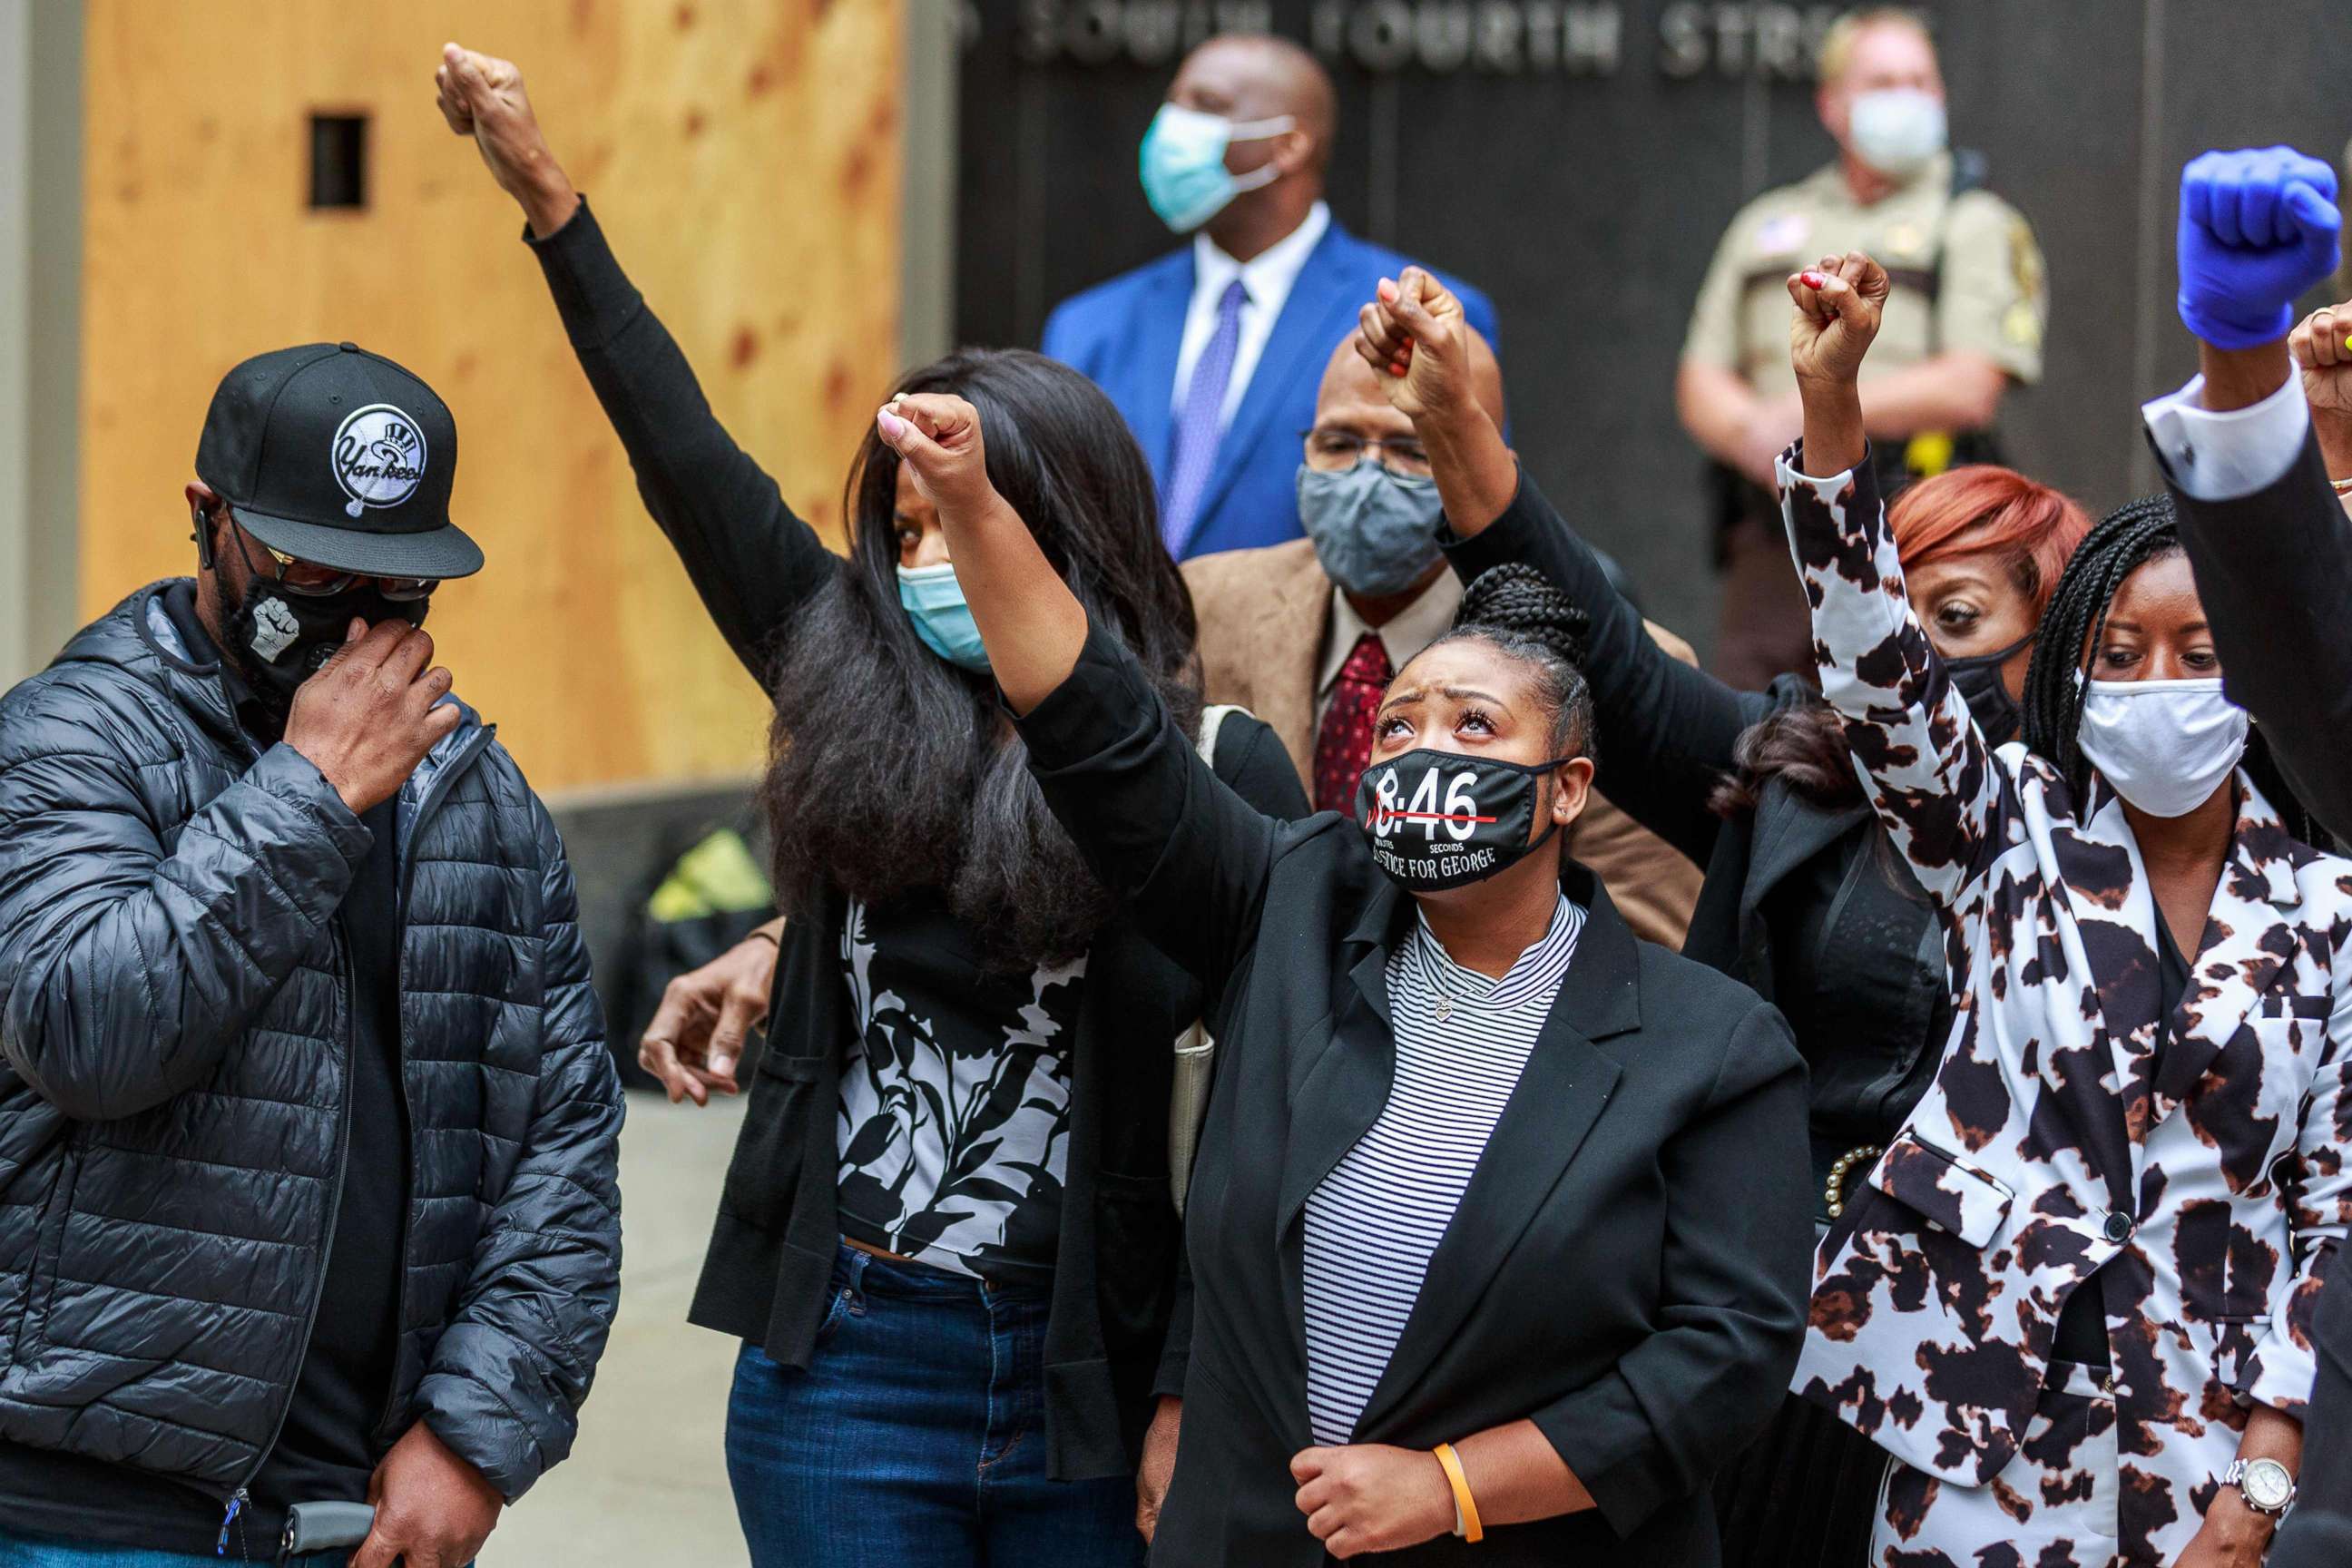 PHOTO: George Floyd's family raise their fists at a press conference outside the family justice center after a court hearing on the murder of George Floyd in Minneapolis, Sept. 11, 2020.